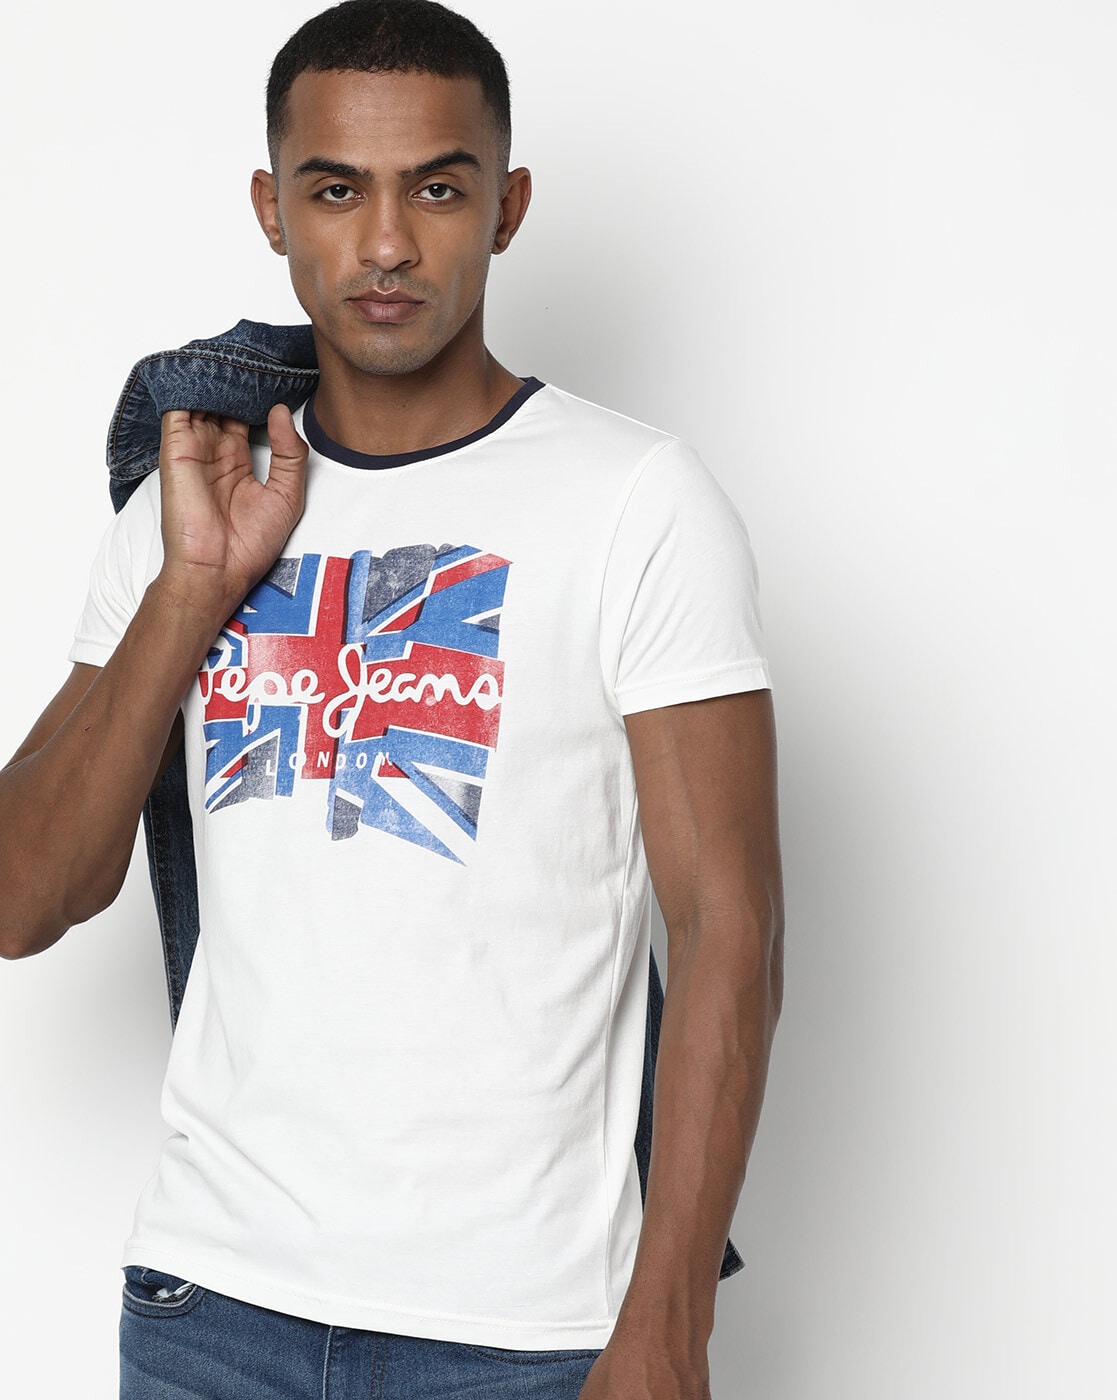 Buy Off-White Tshirts for Men Pepe Online Jeans by